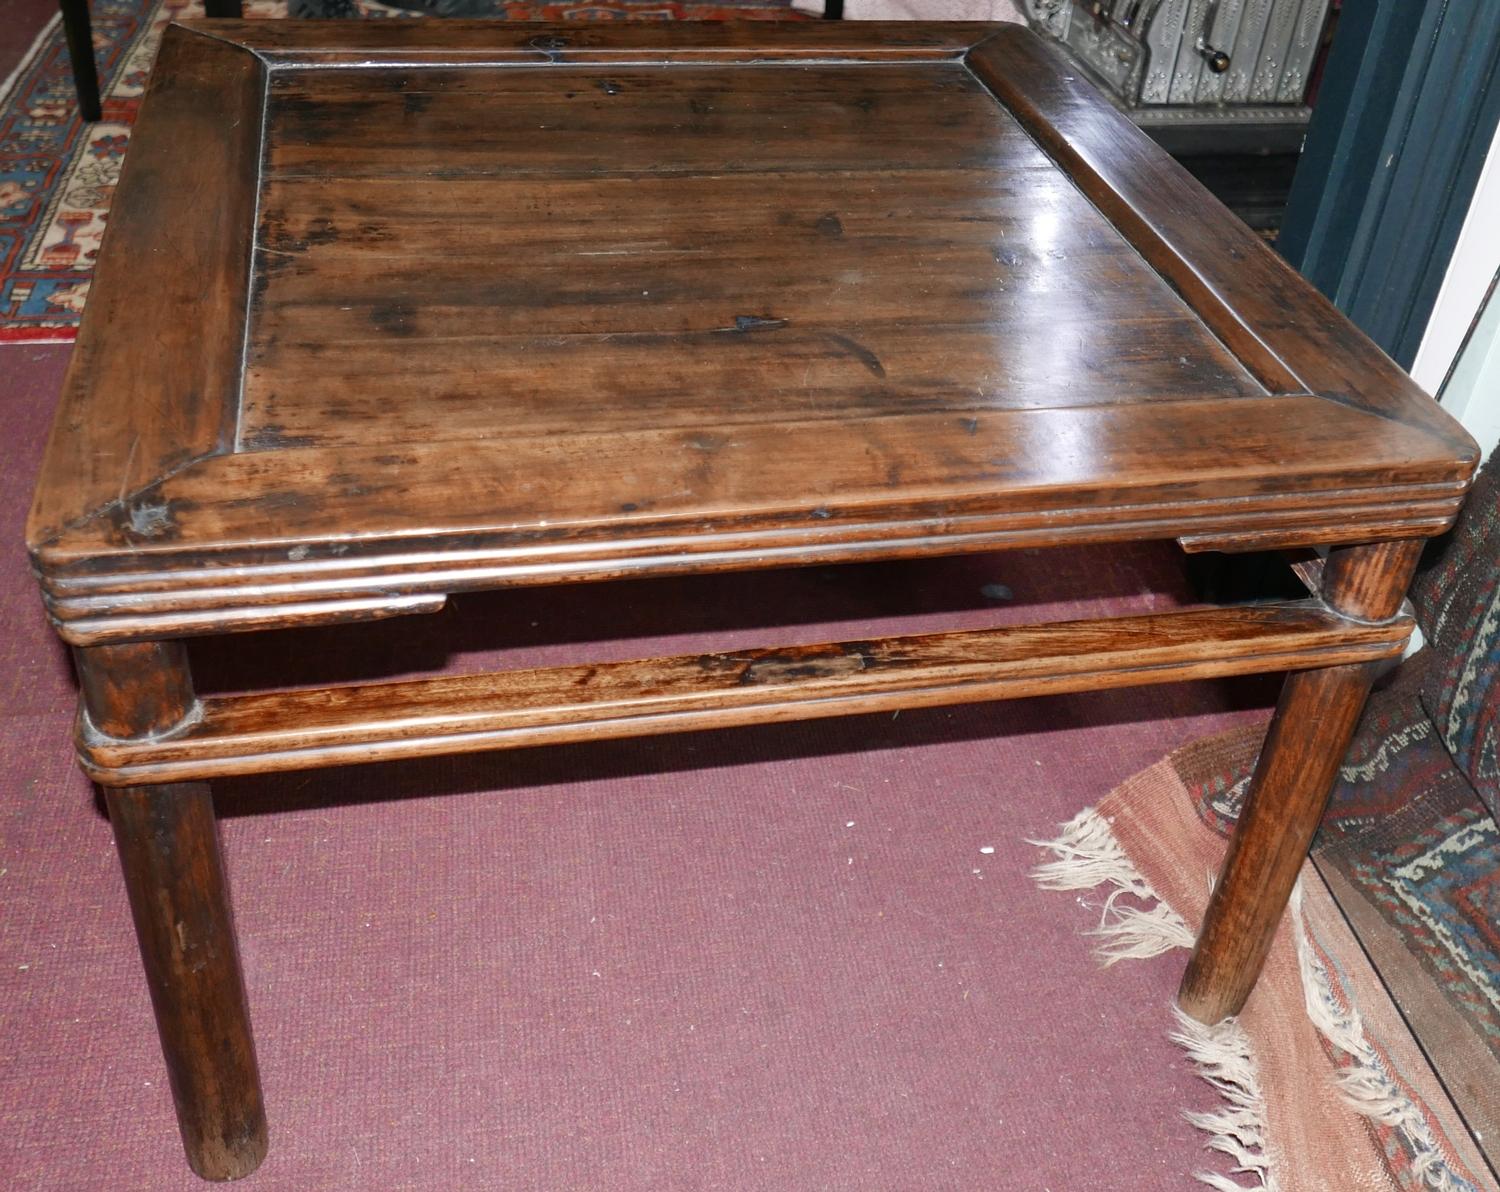 An early 20th century Chinese hardwood low table with a square-shaped top and ribbed side detailing, - Image 3 of 4